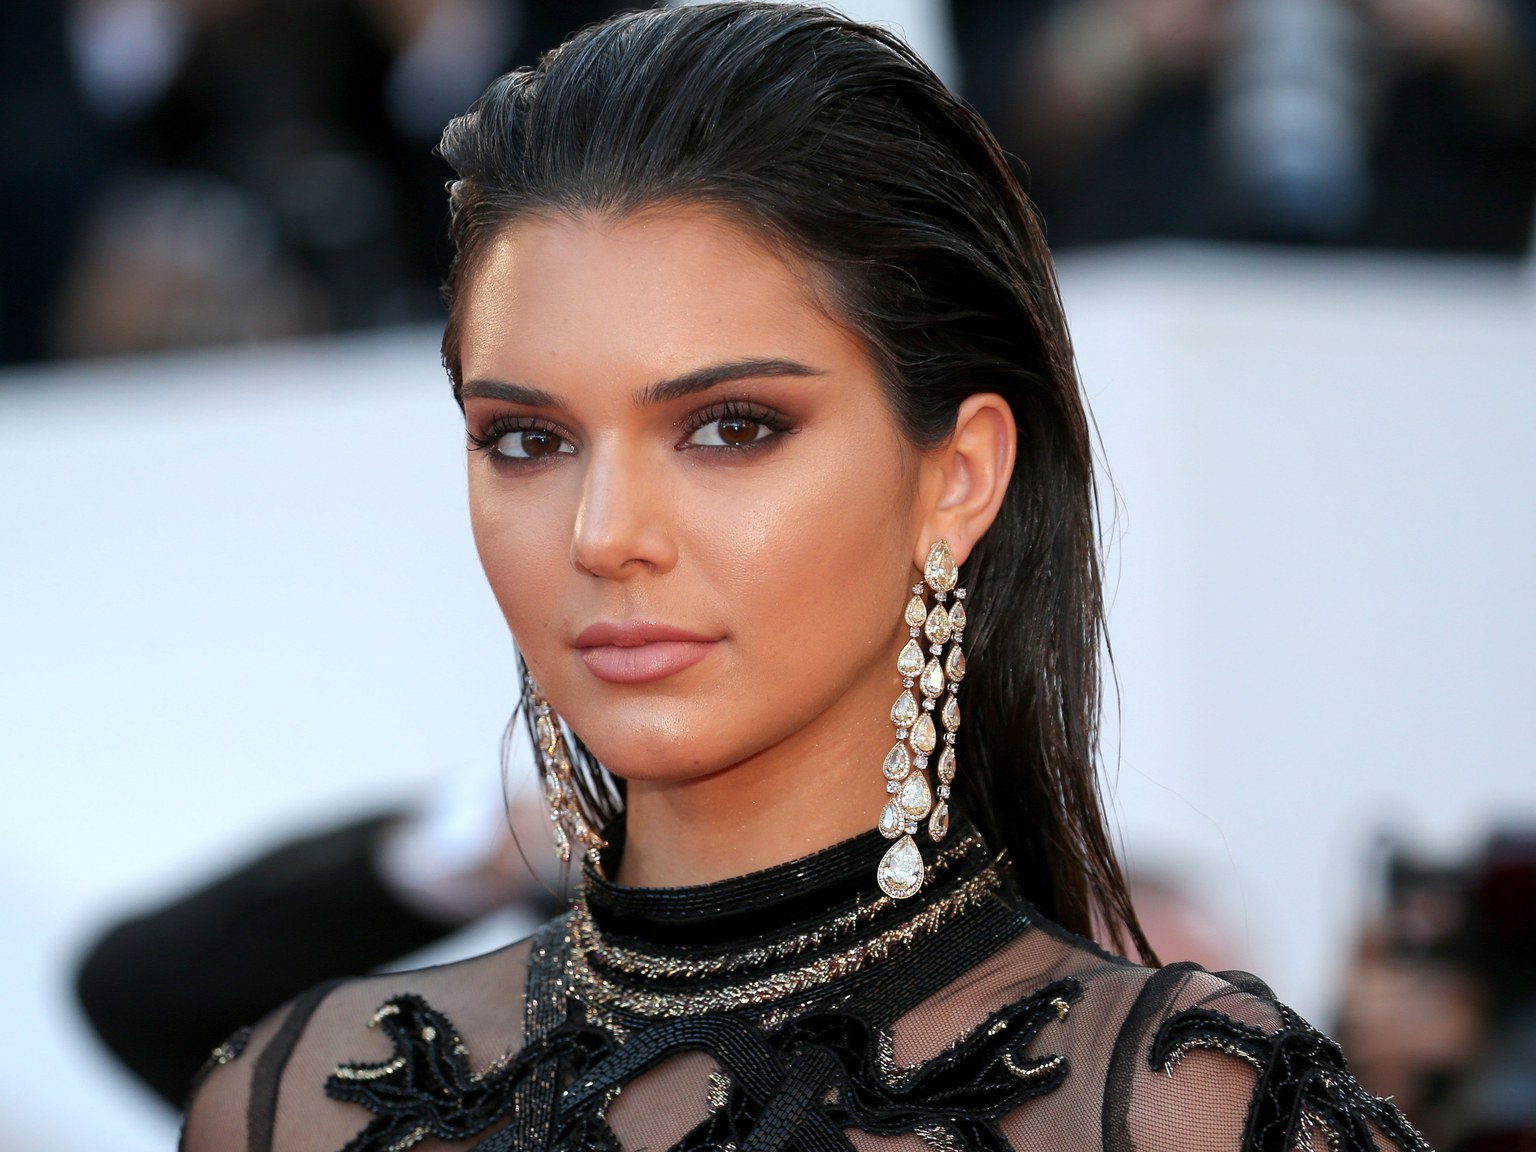 Kendall Jenner Too Has Started Showing Boobs